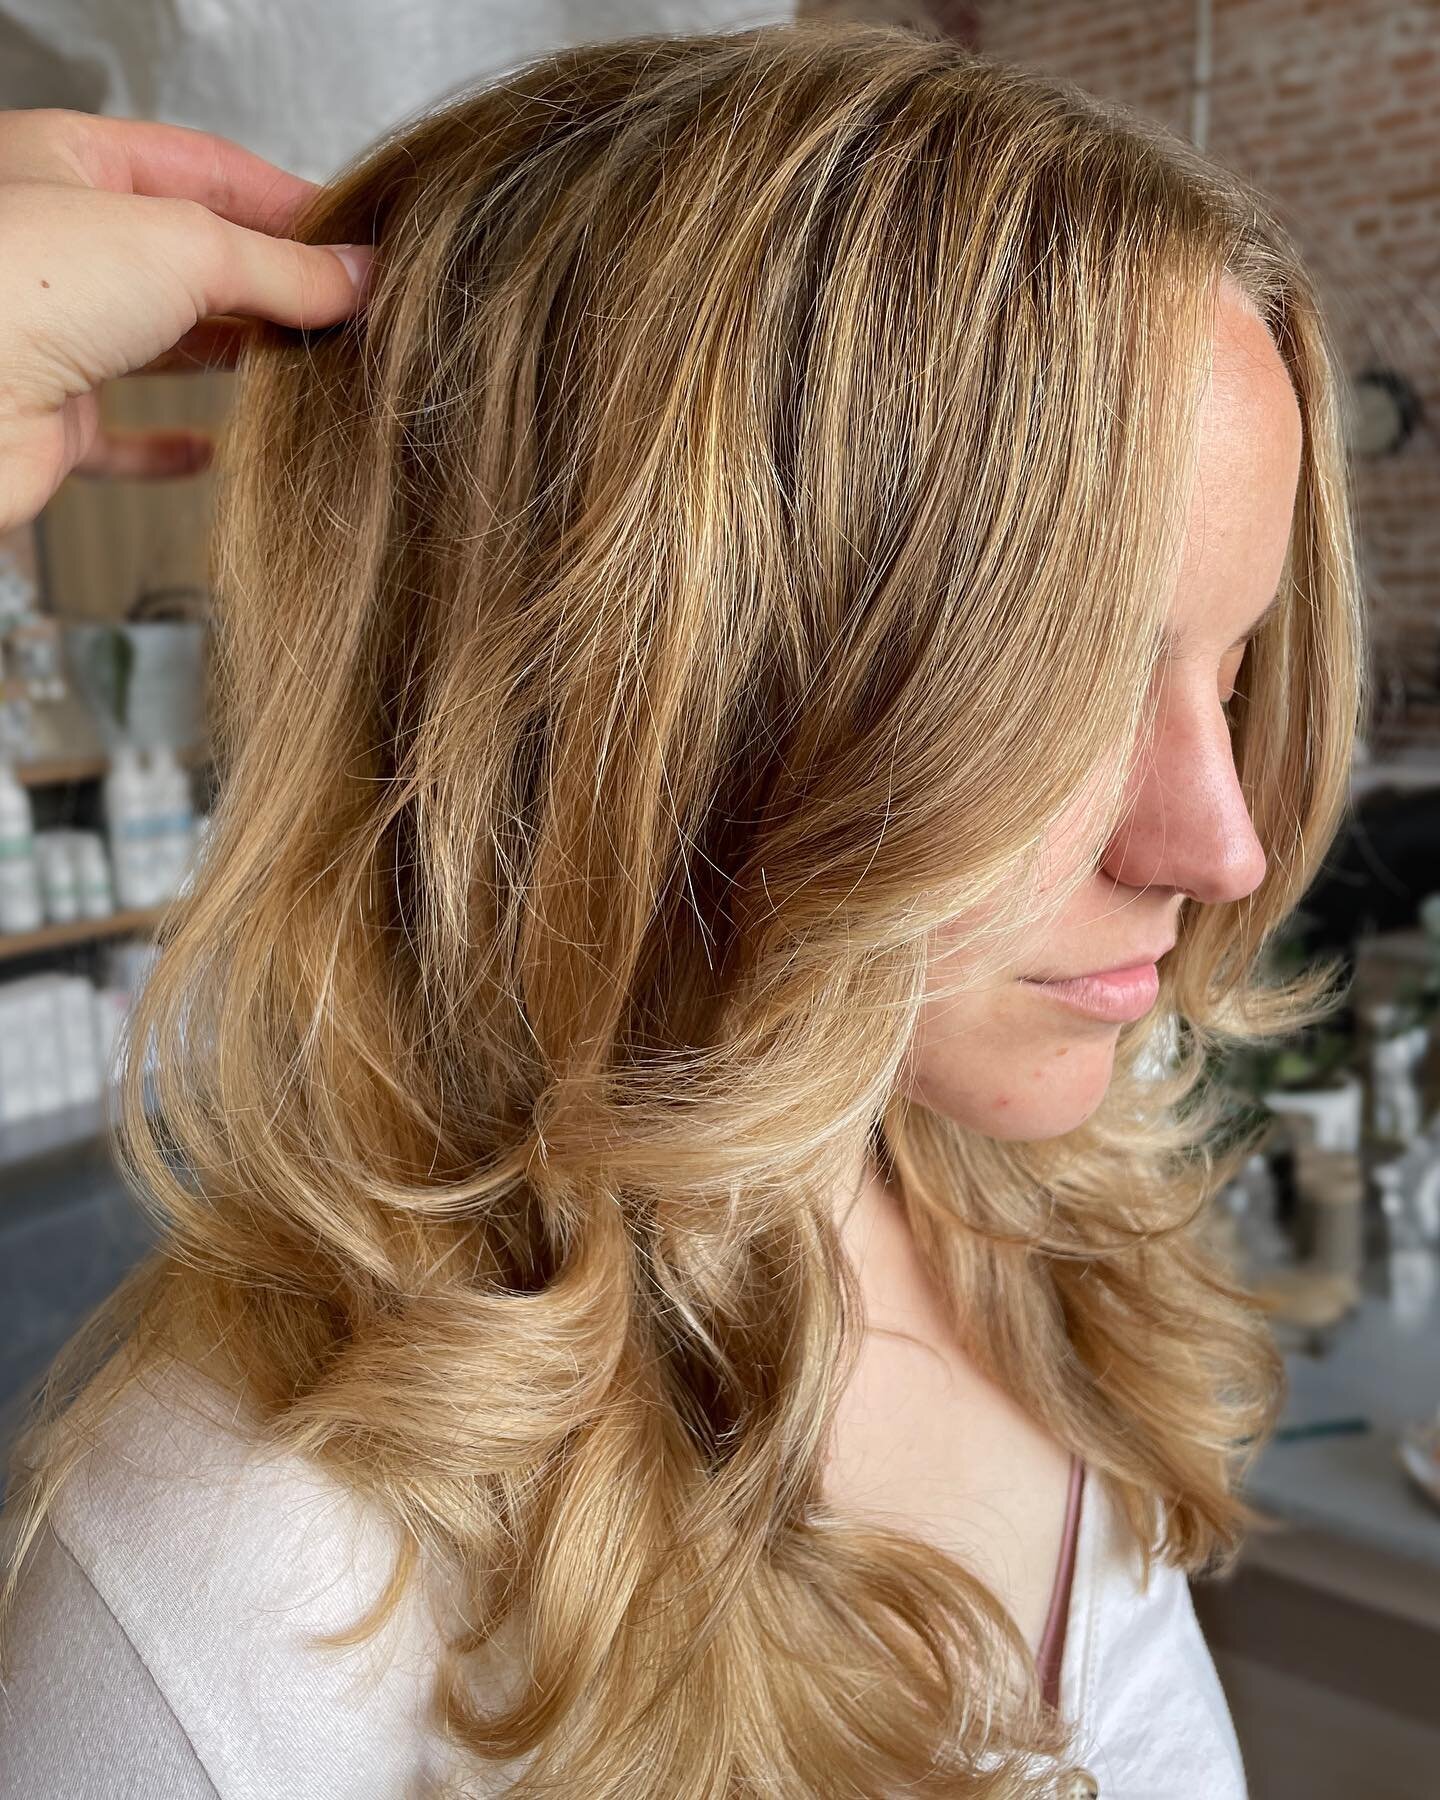 Back and better than ever ☺️ Had the pleasure of doing this hand-painted balayage on my friend @sumtrus as my first color after my break. Swipe for before ➡️➡️➡️